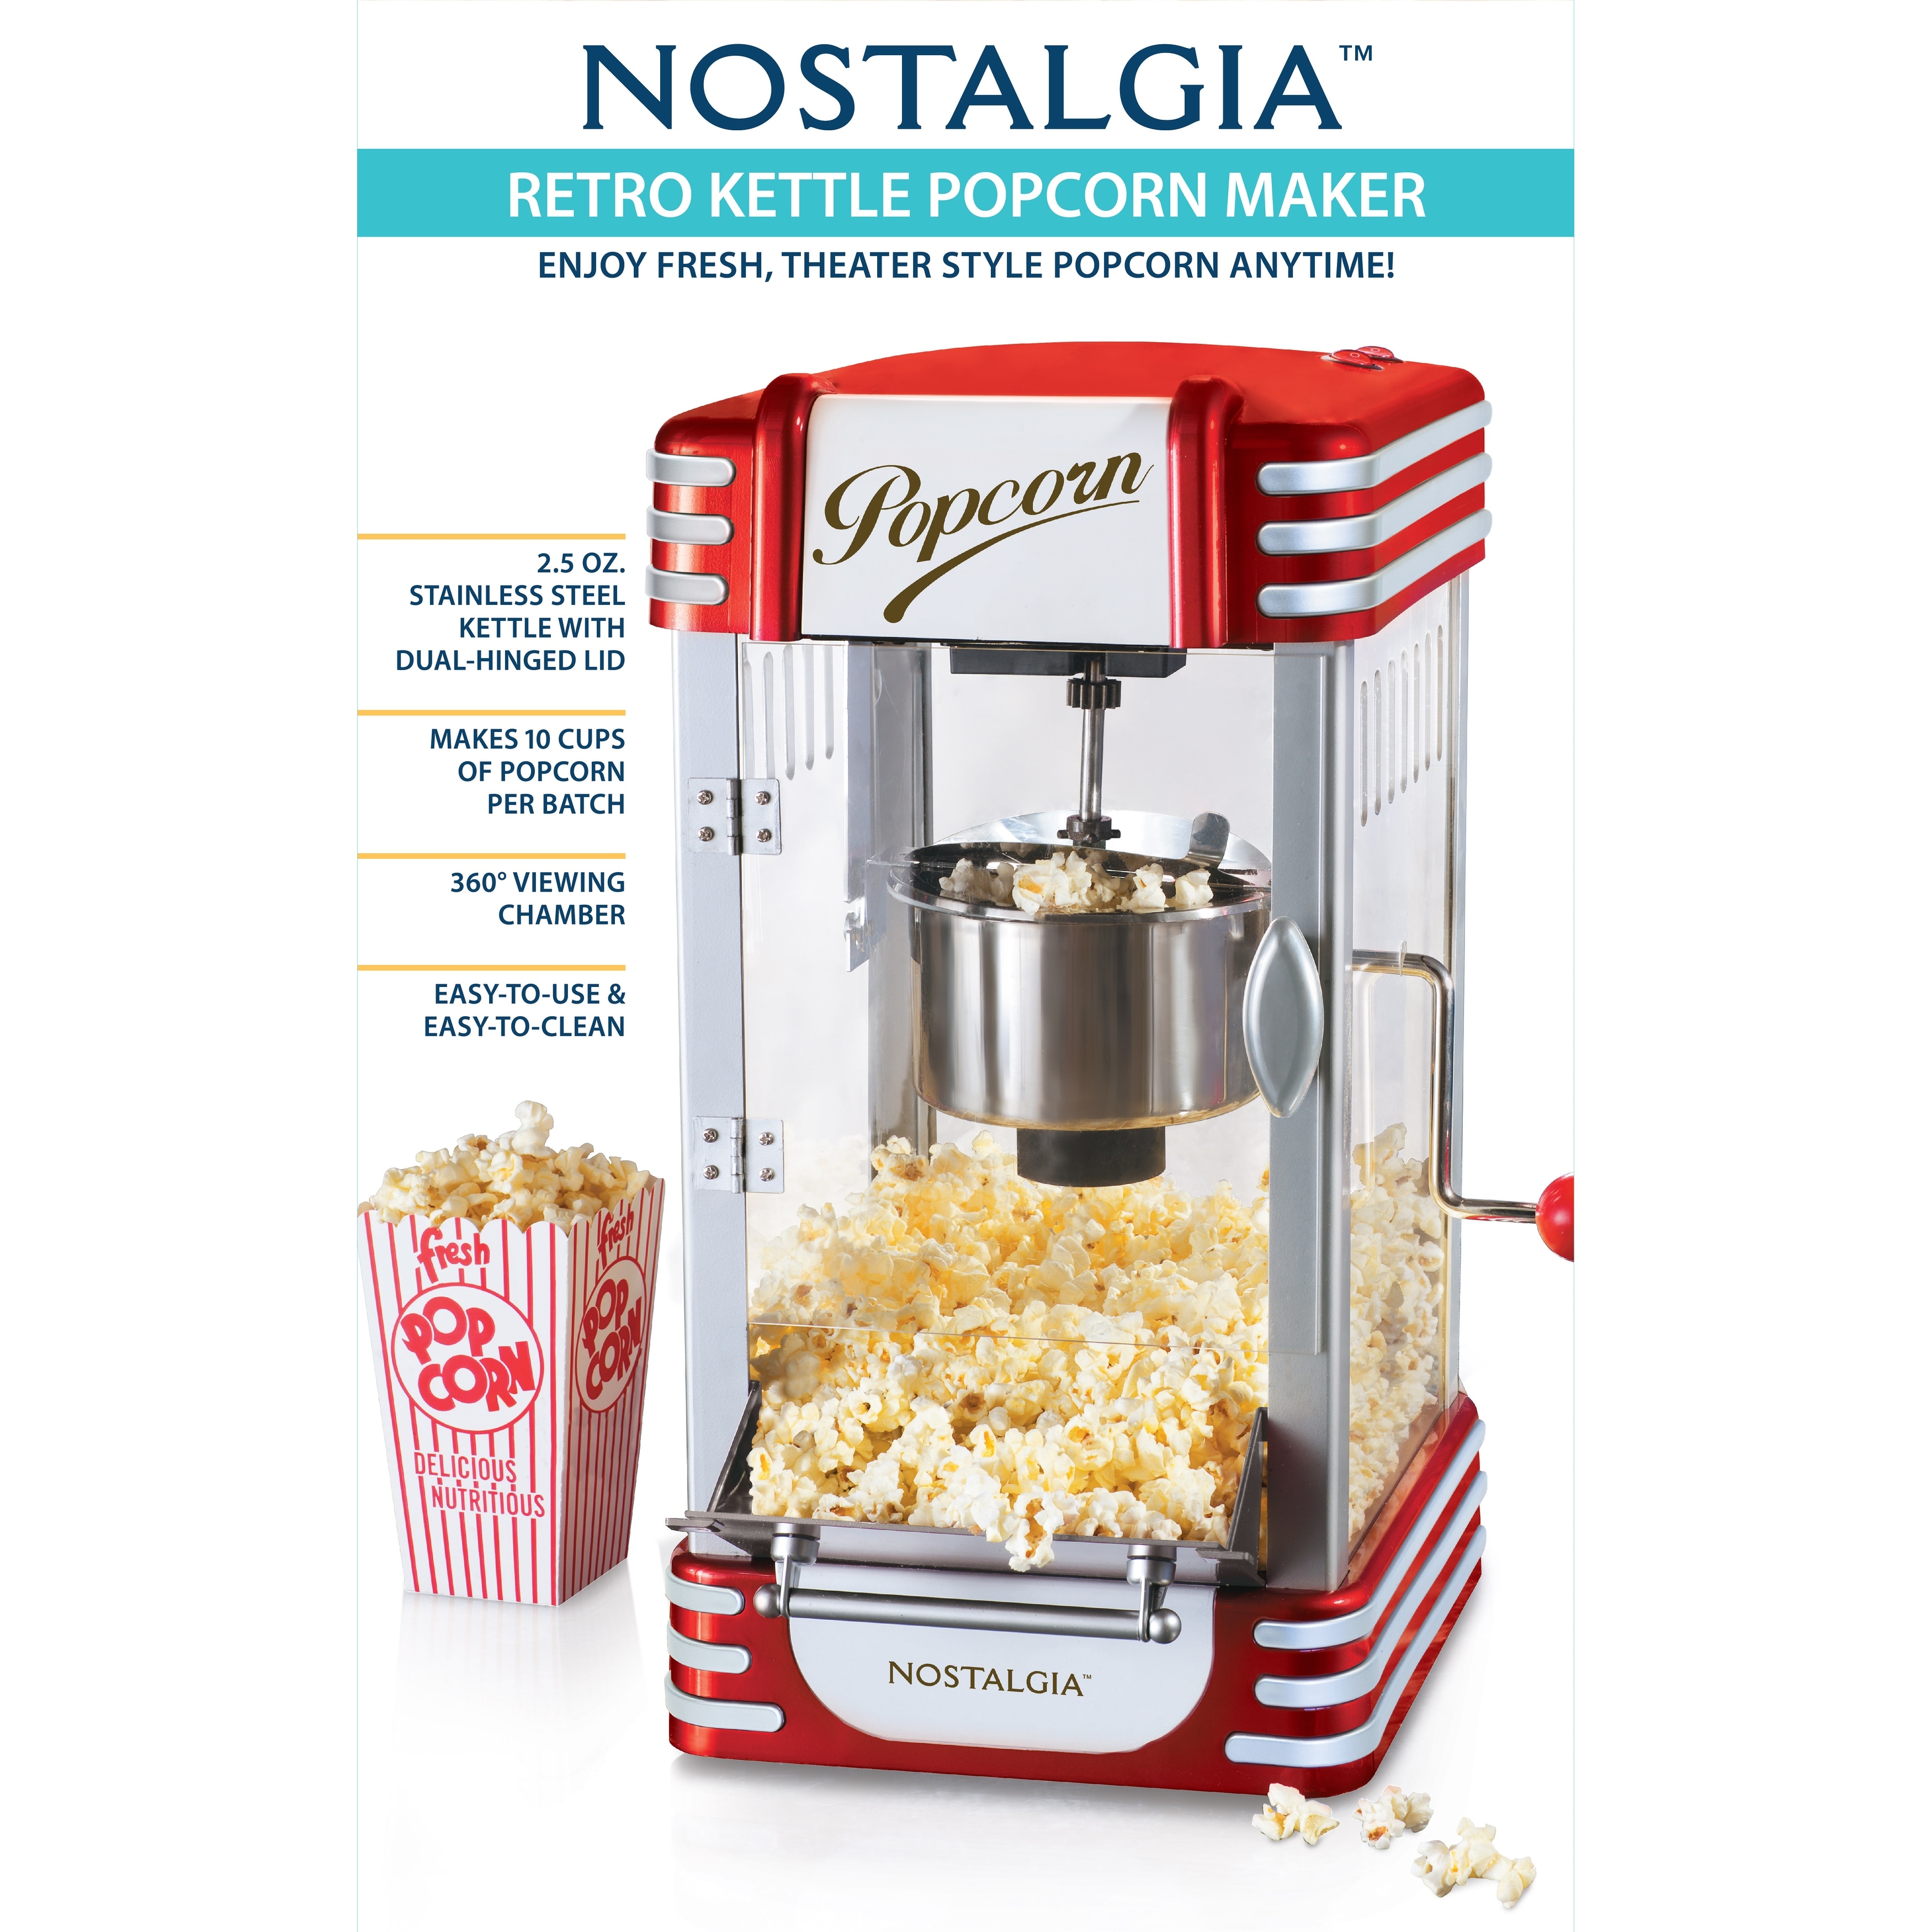 https://ak1.ostkcdn.com/images/products/is/images/direct/9ccb42dff1c7184e821039bf73a89ed3b26468ae/Nostalgia-2.5-Ounce-Retro-Kettle-Popcorn-Maker.jpg